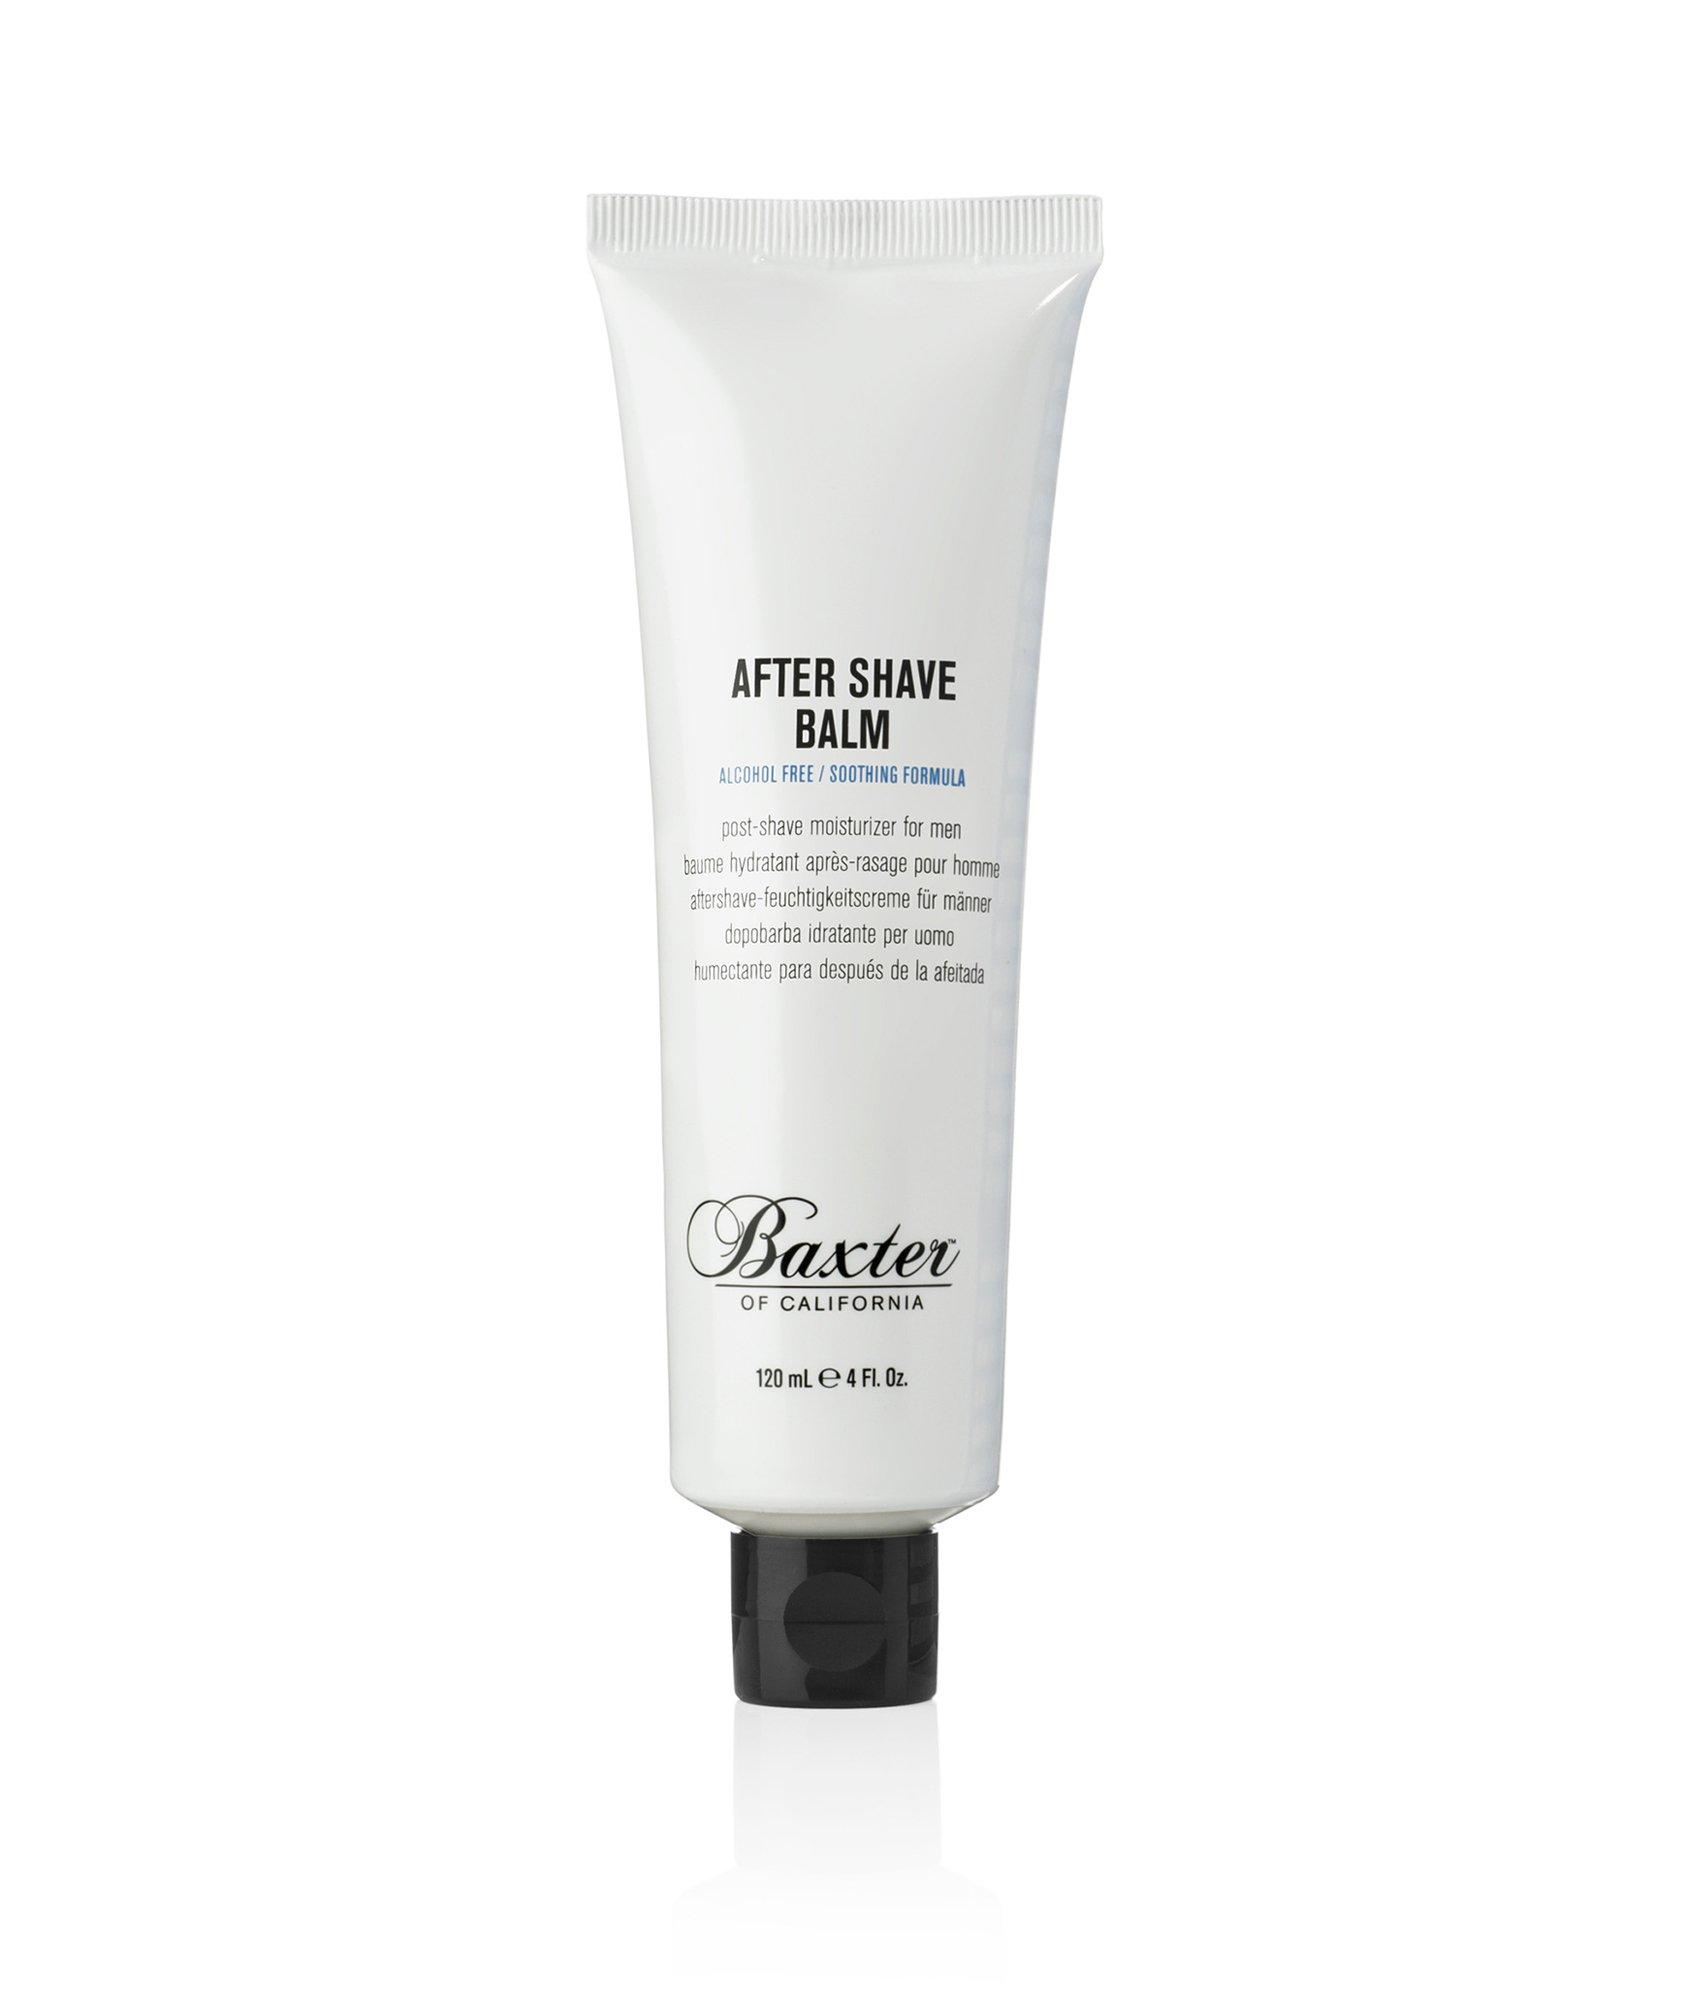 After Shave Balm image 0